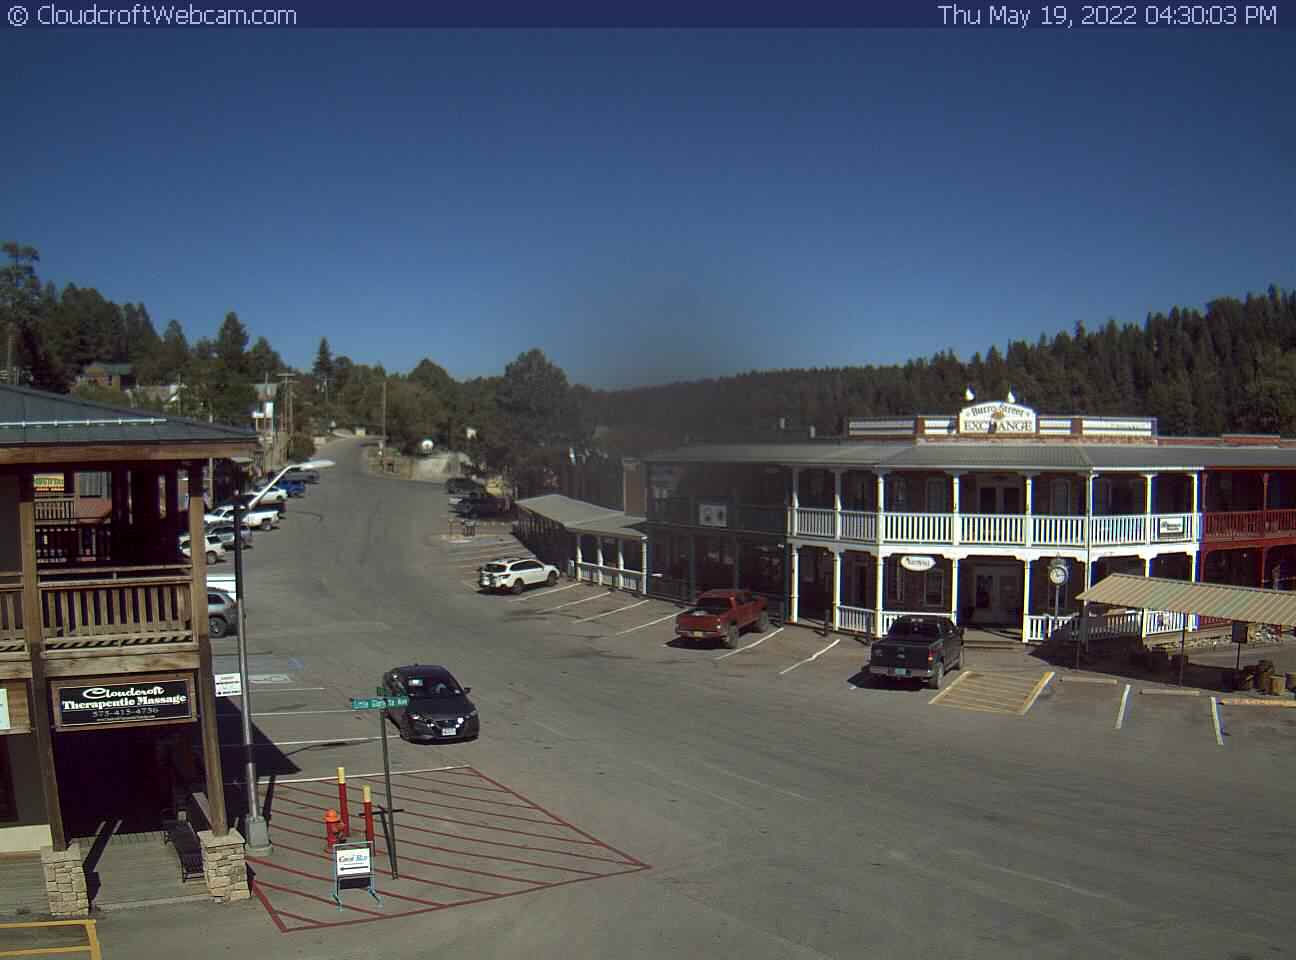 Cloudcroft, NM - Burro Ave. looking East - USA